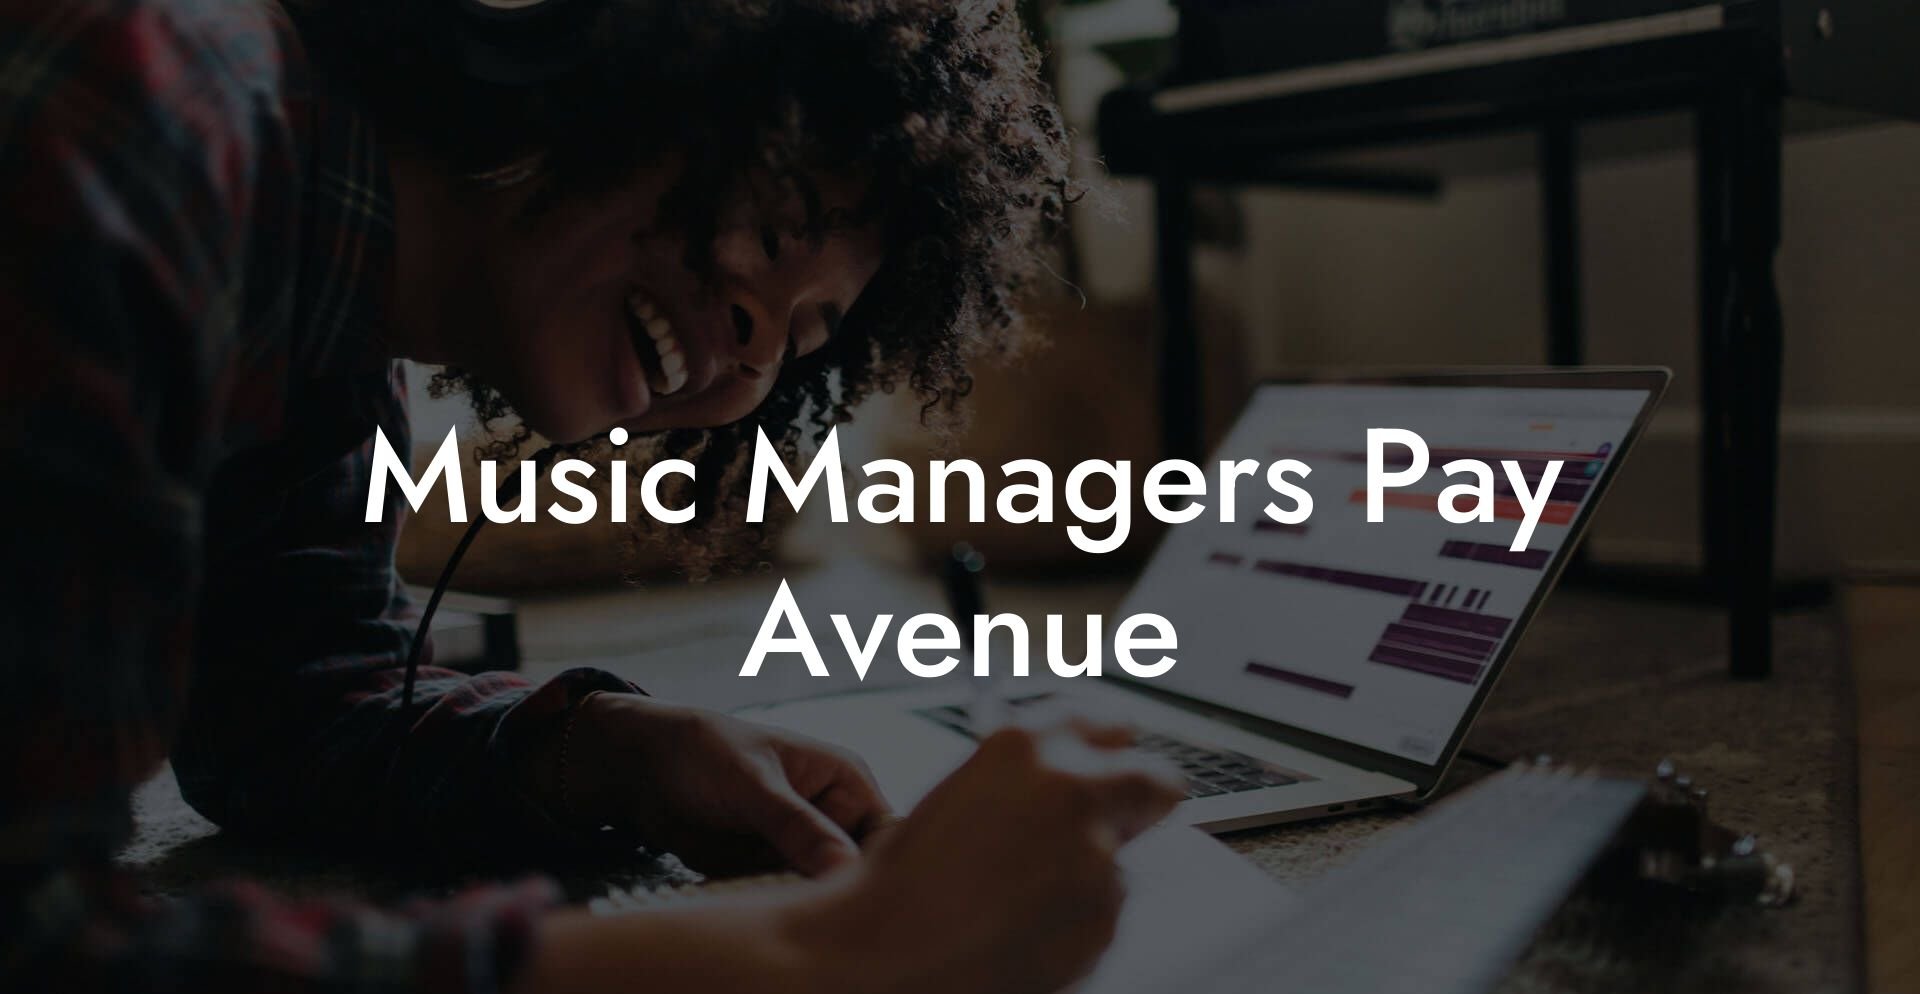 Music Managers Pay Avenue